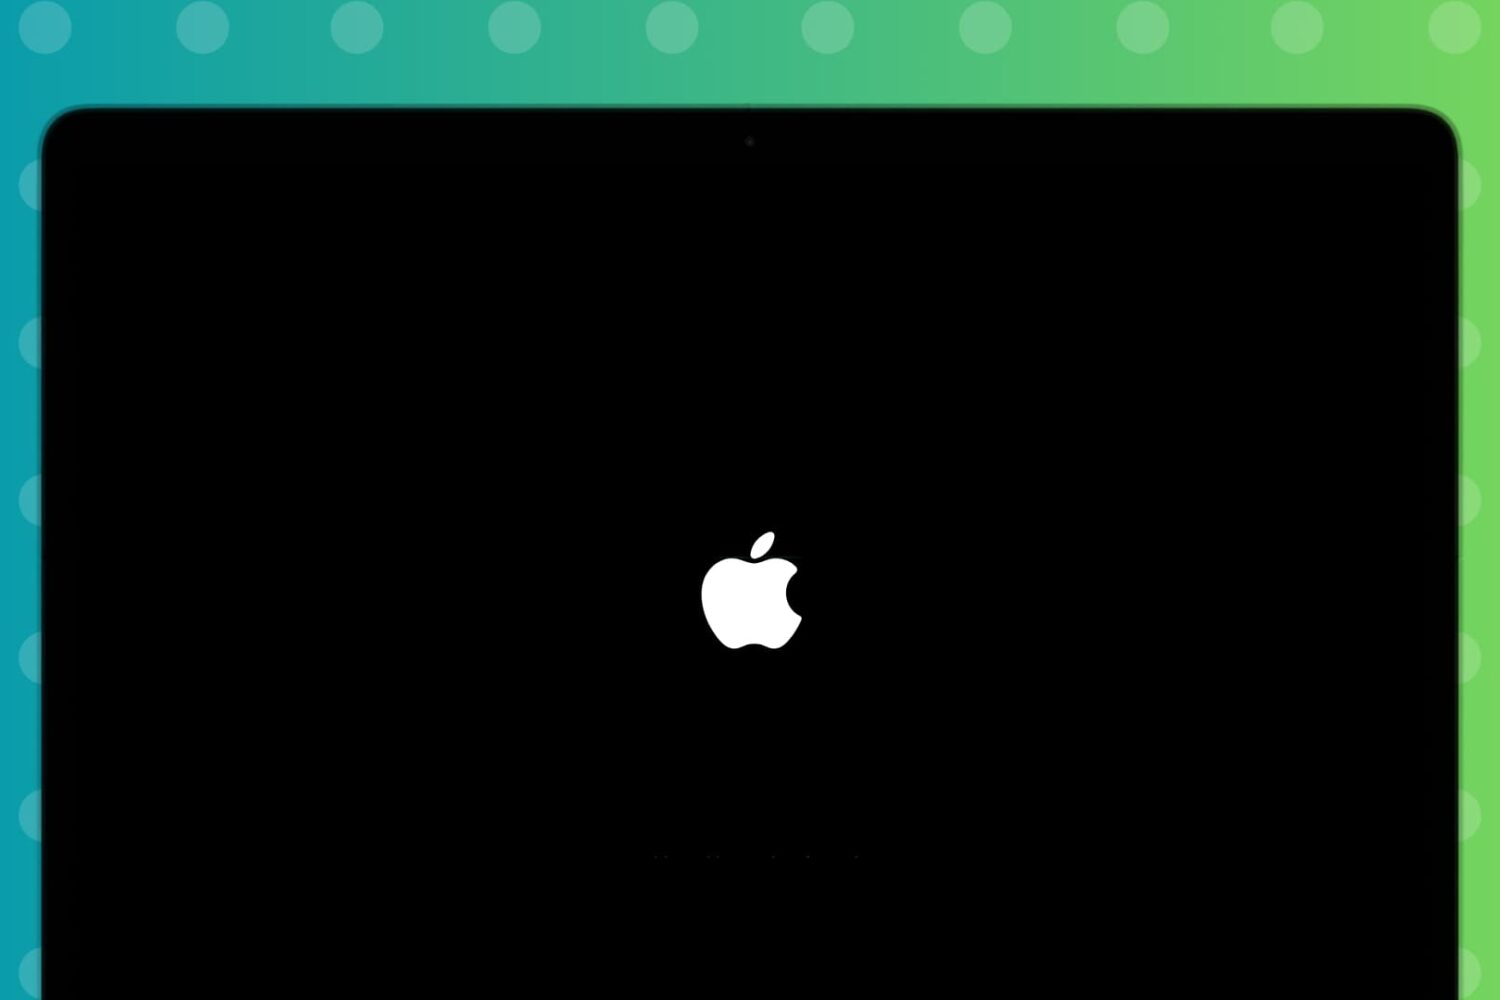 Mac on startup screen with Apple logo on black background